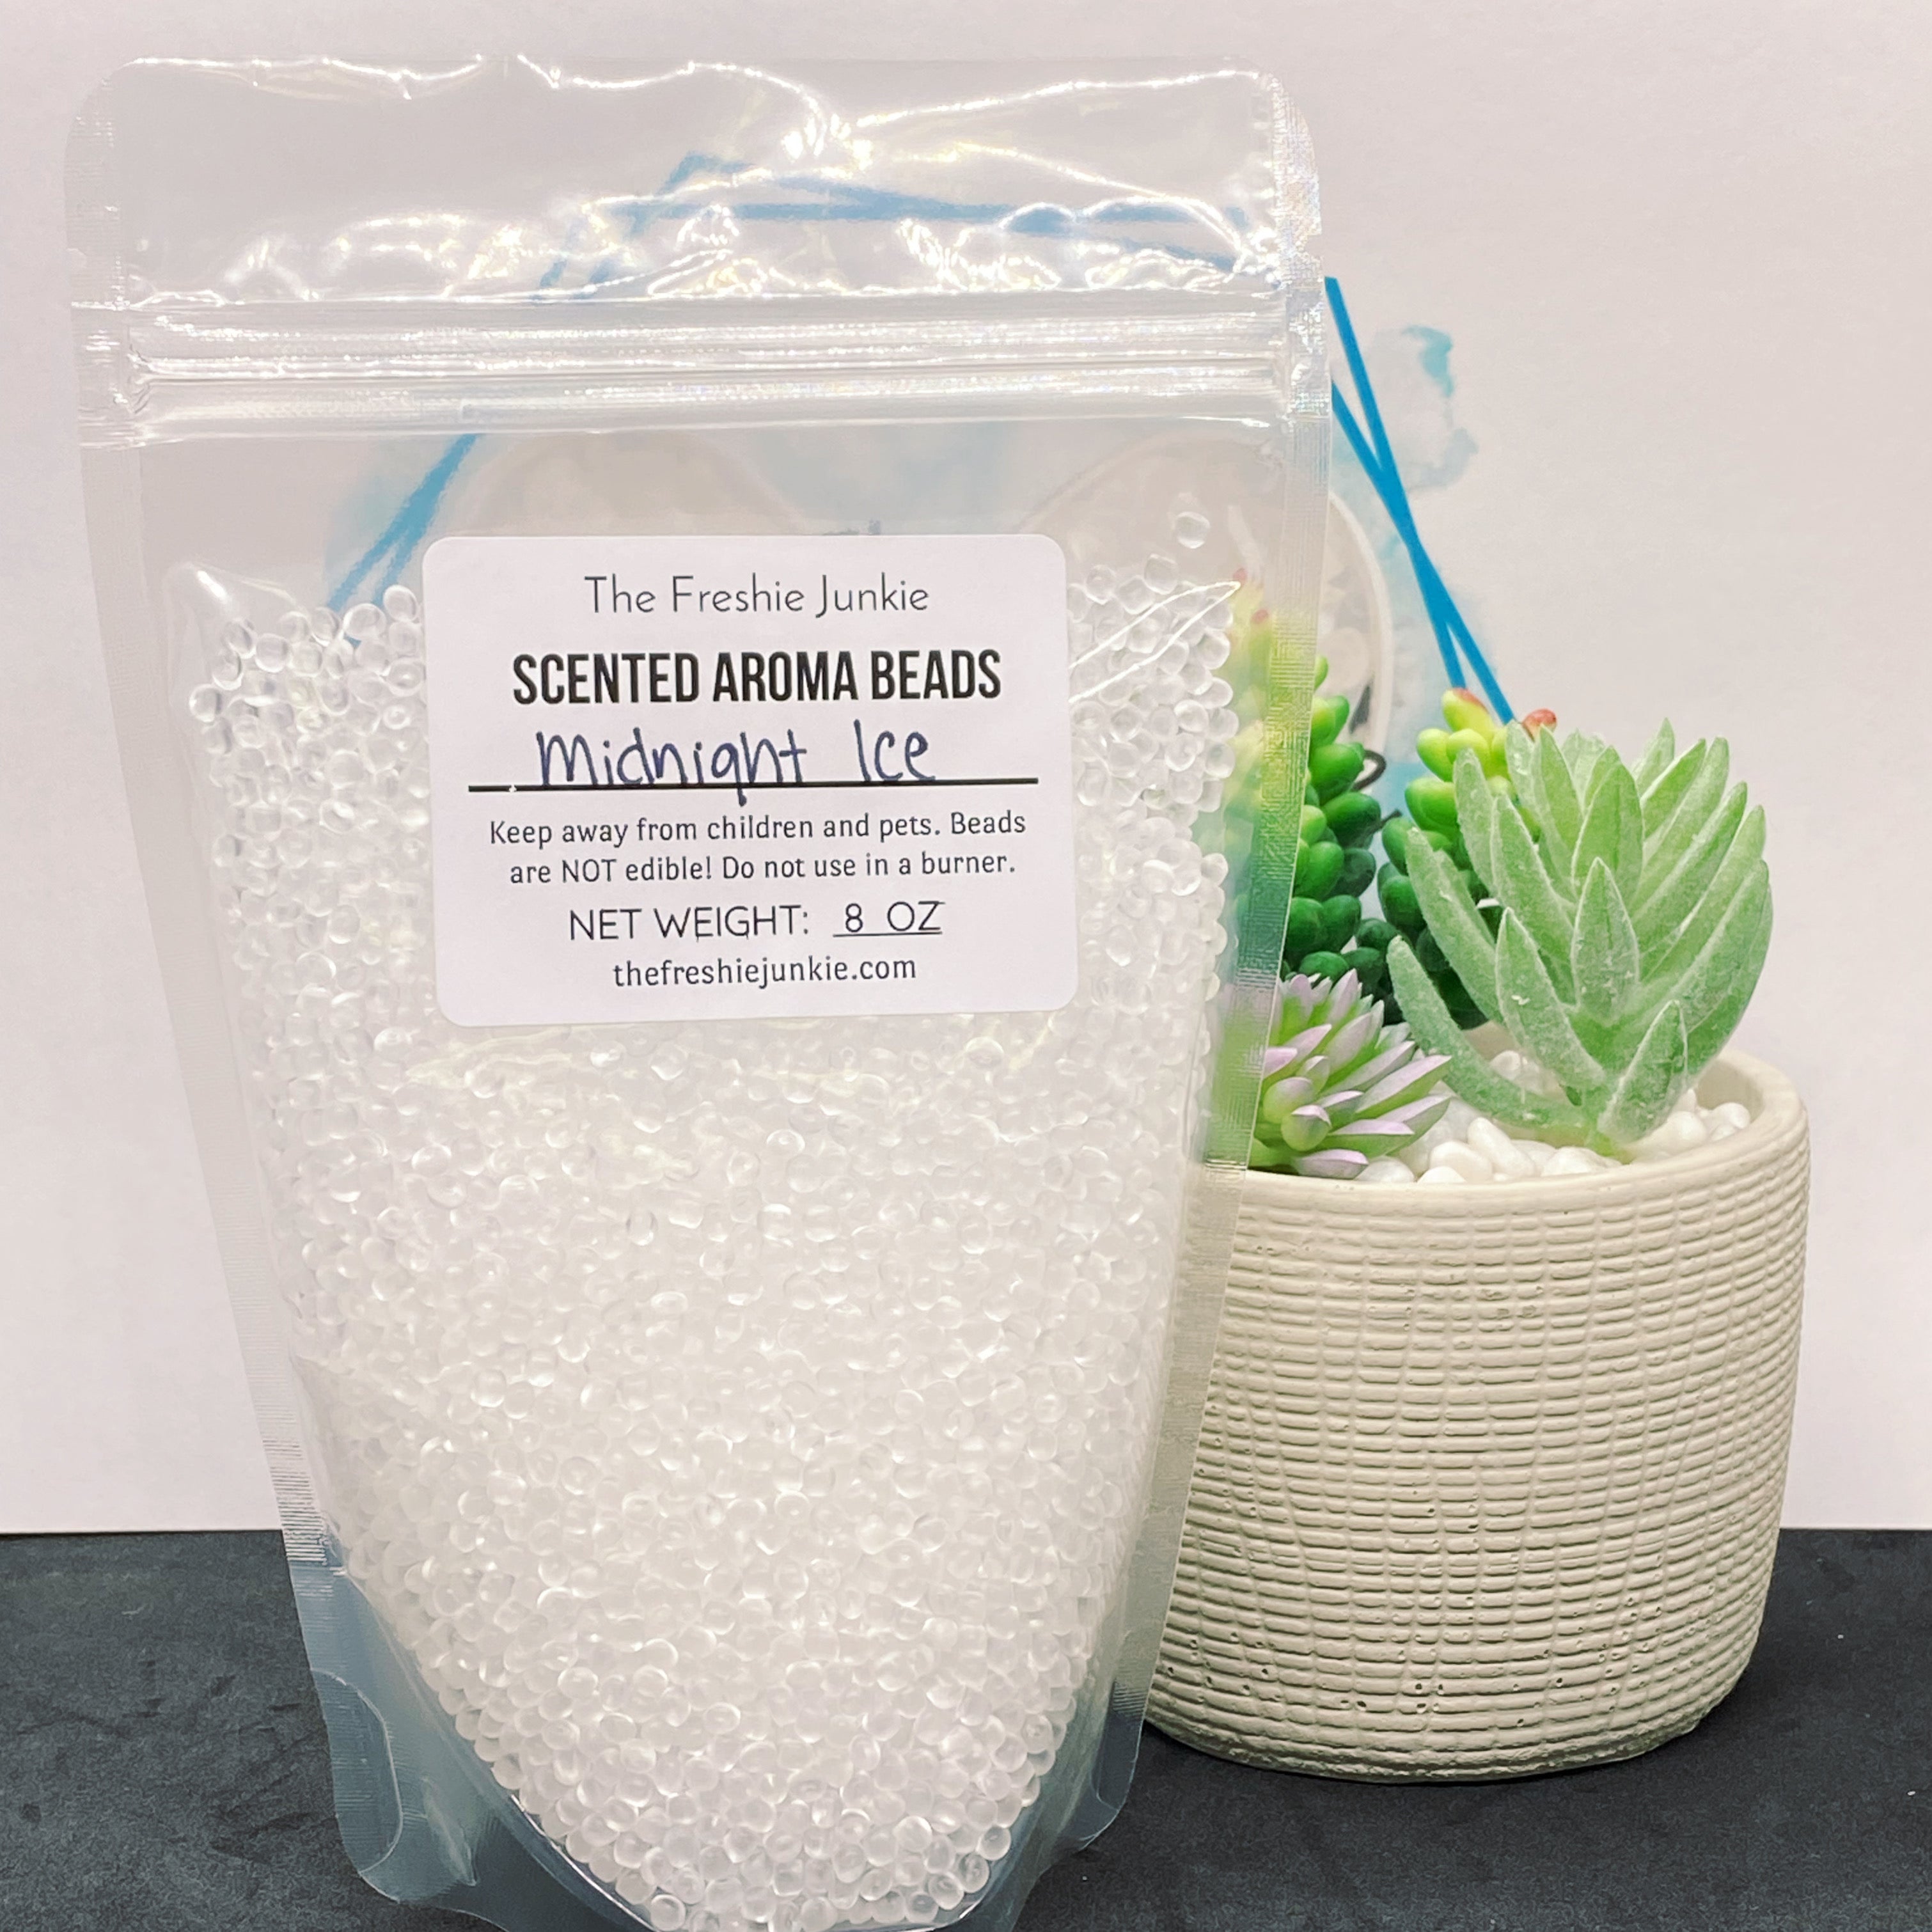 Sukh 15oz Unscented Aroma Beads - Scentsy Wax Beads for Car Freshies  Scents, DIY Air Freshener, Diy Scented Beads, Aroma Beads, and Air freshner